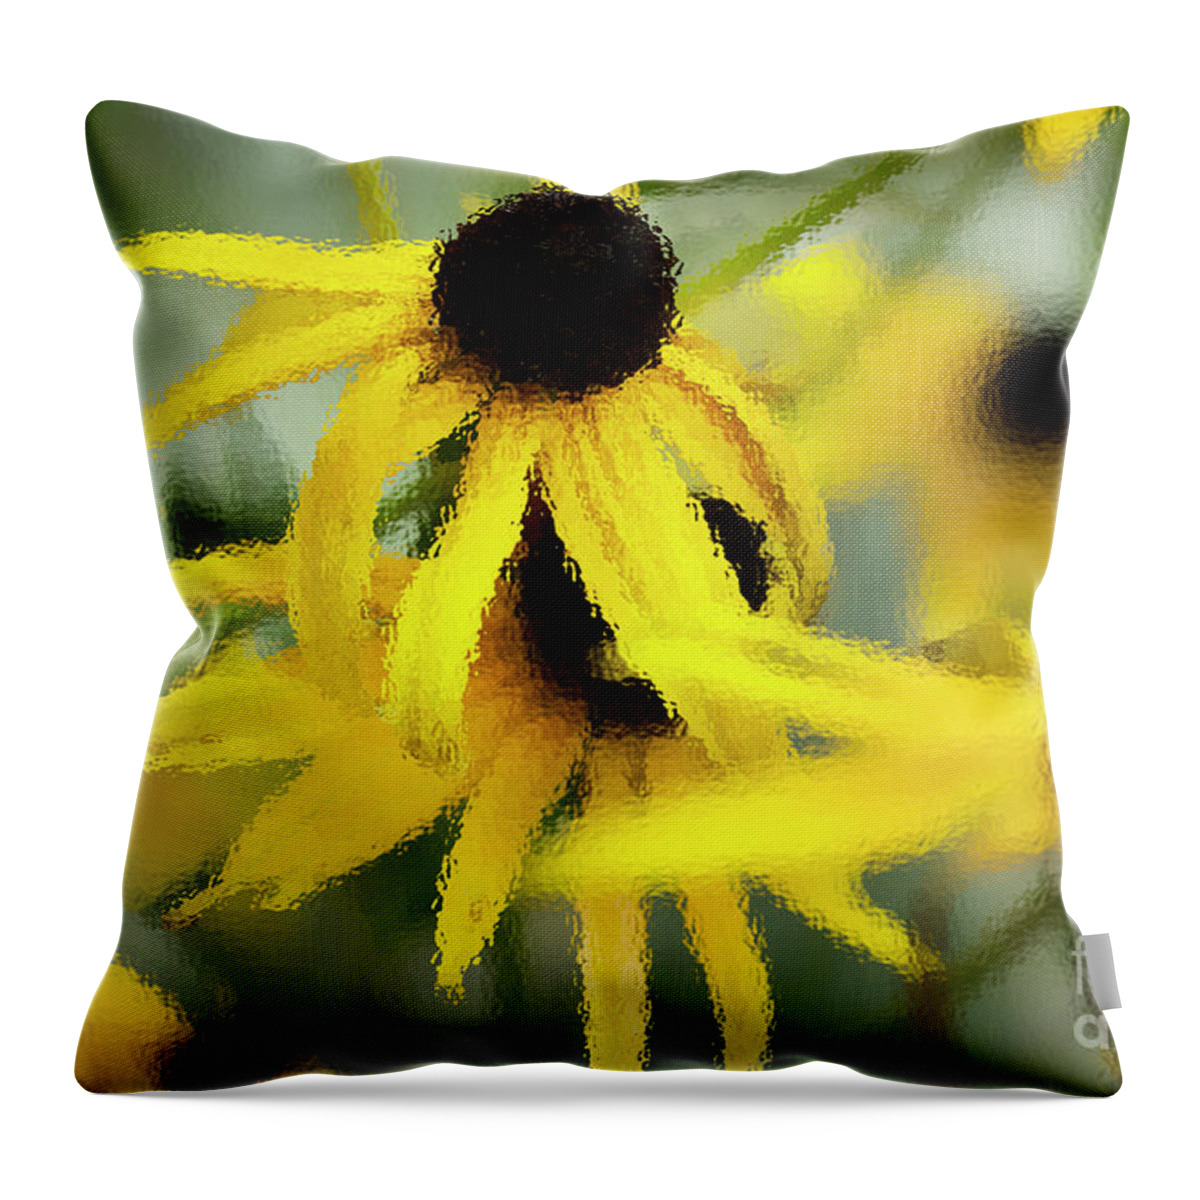 Flowers Throw Pillow featuring the photograph Impression Of Autumn by Mike Eingle